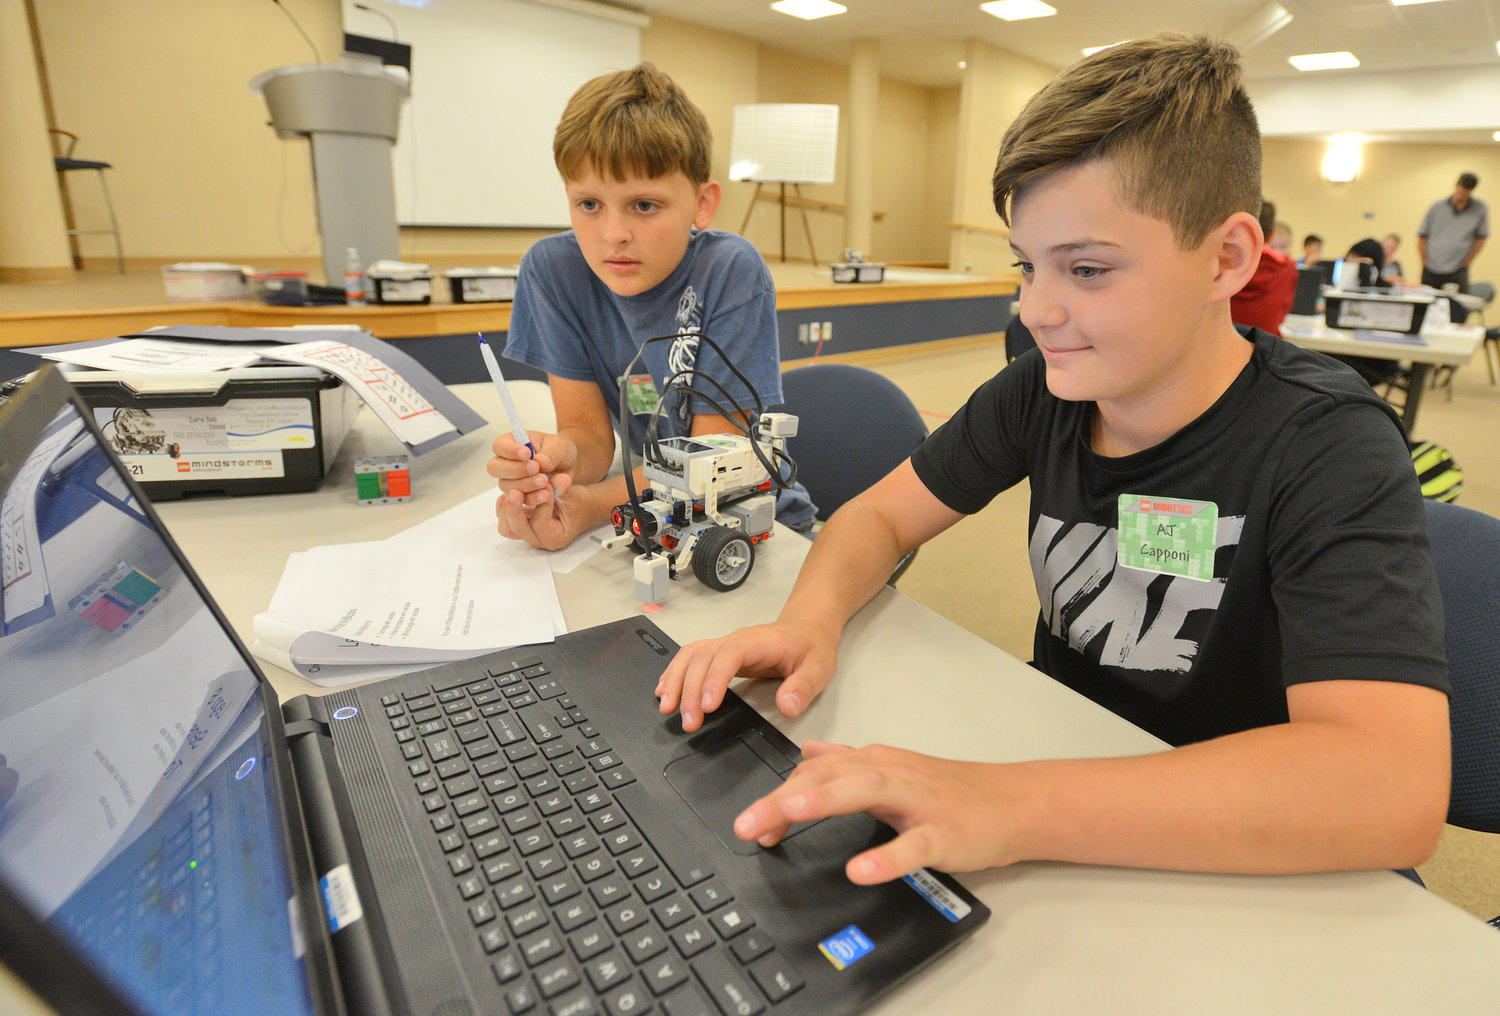 ROBOT FUN — Students work on programming their Lego robot at a STEM (science, technology, engineering, math) Outreach Program camp at the Griffiss Institute in this 2019 file photo. The institute, along with Rome Lab (formally called the Air Force Research Laboratory Information Directorate) and the  Innovare Advancement Center will offer free STEM Summer Camp programs for students in grades 5-12.